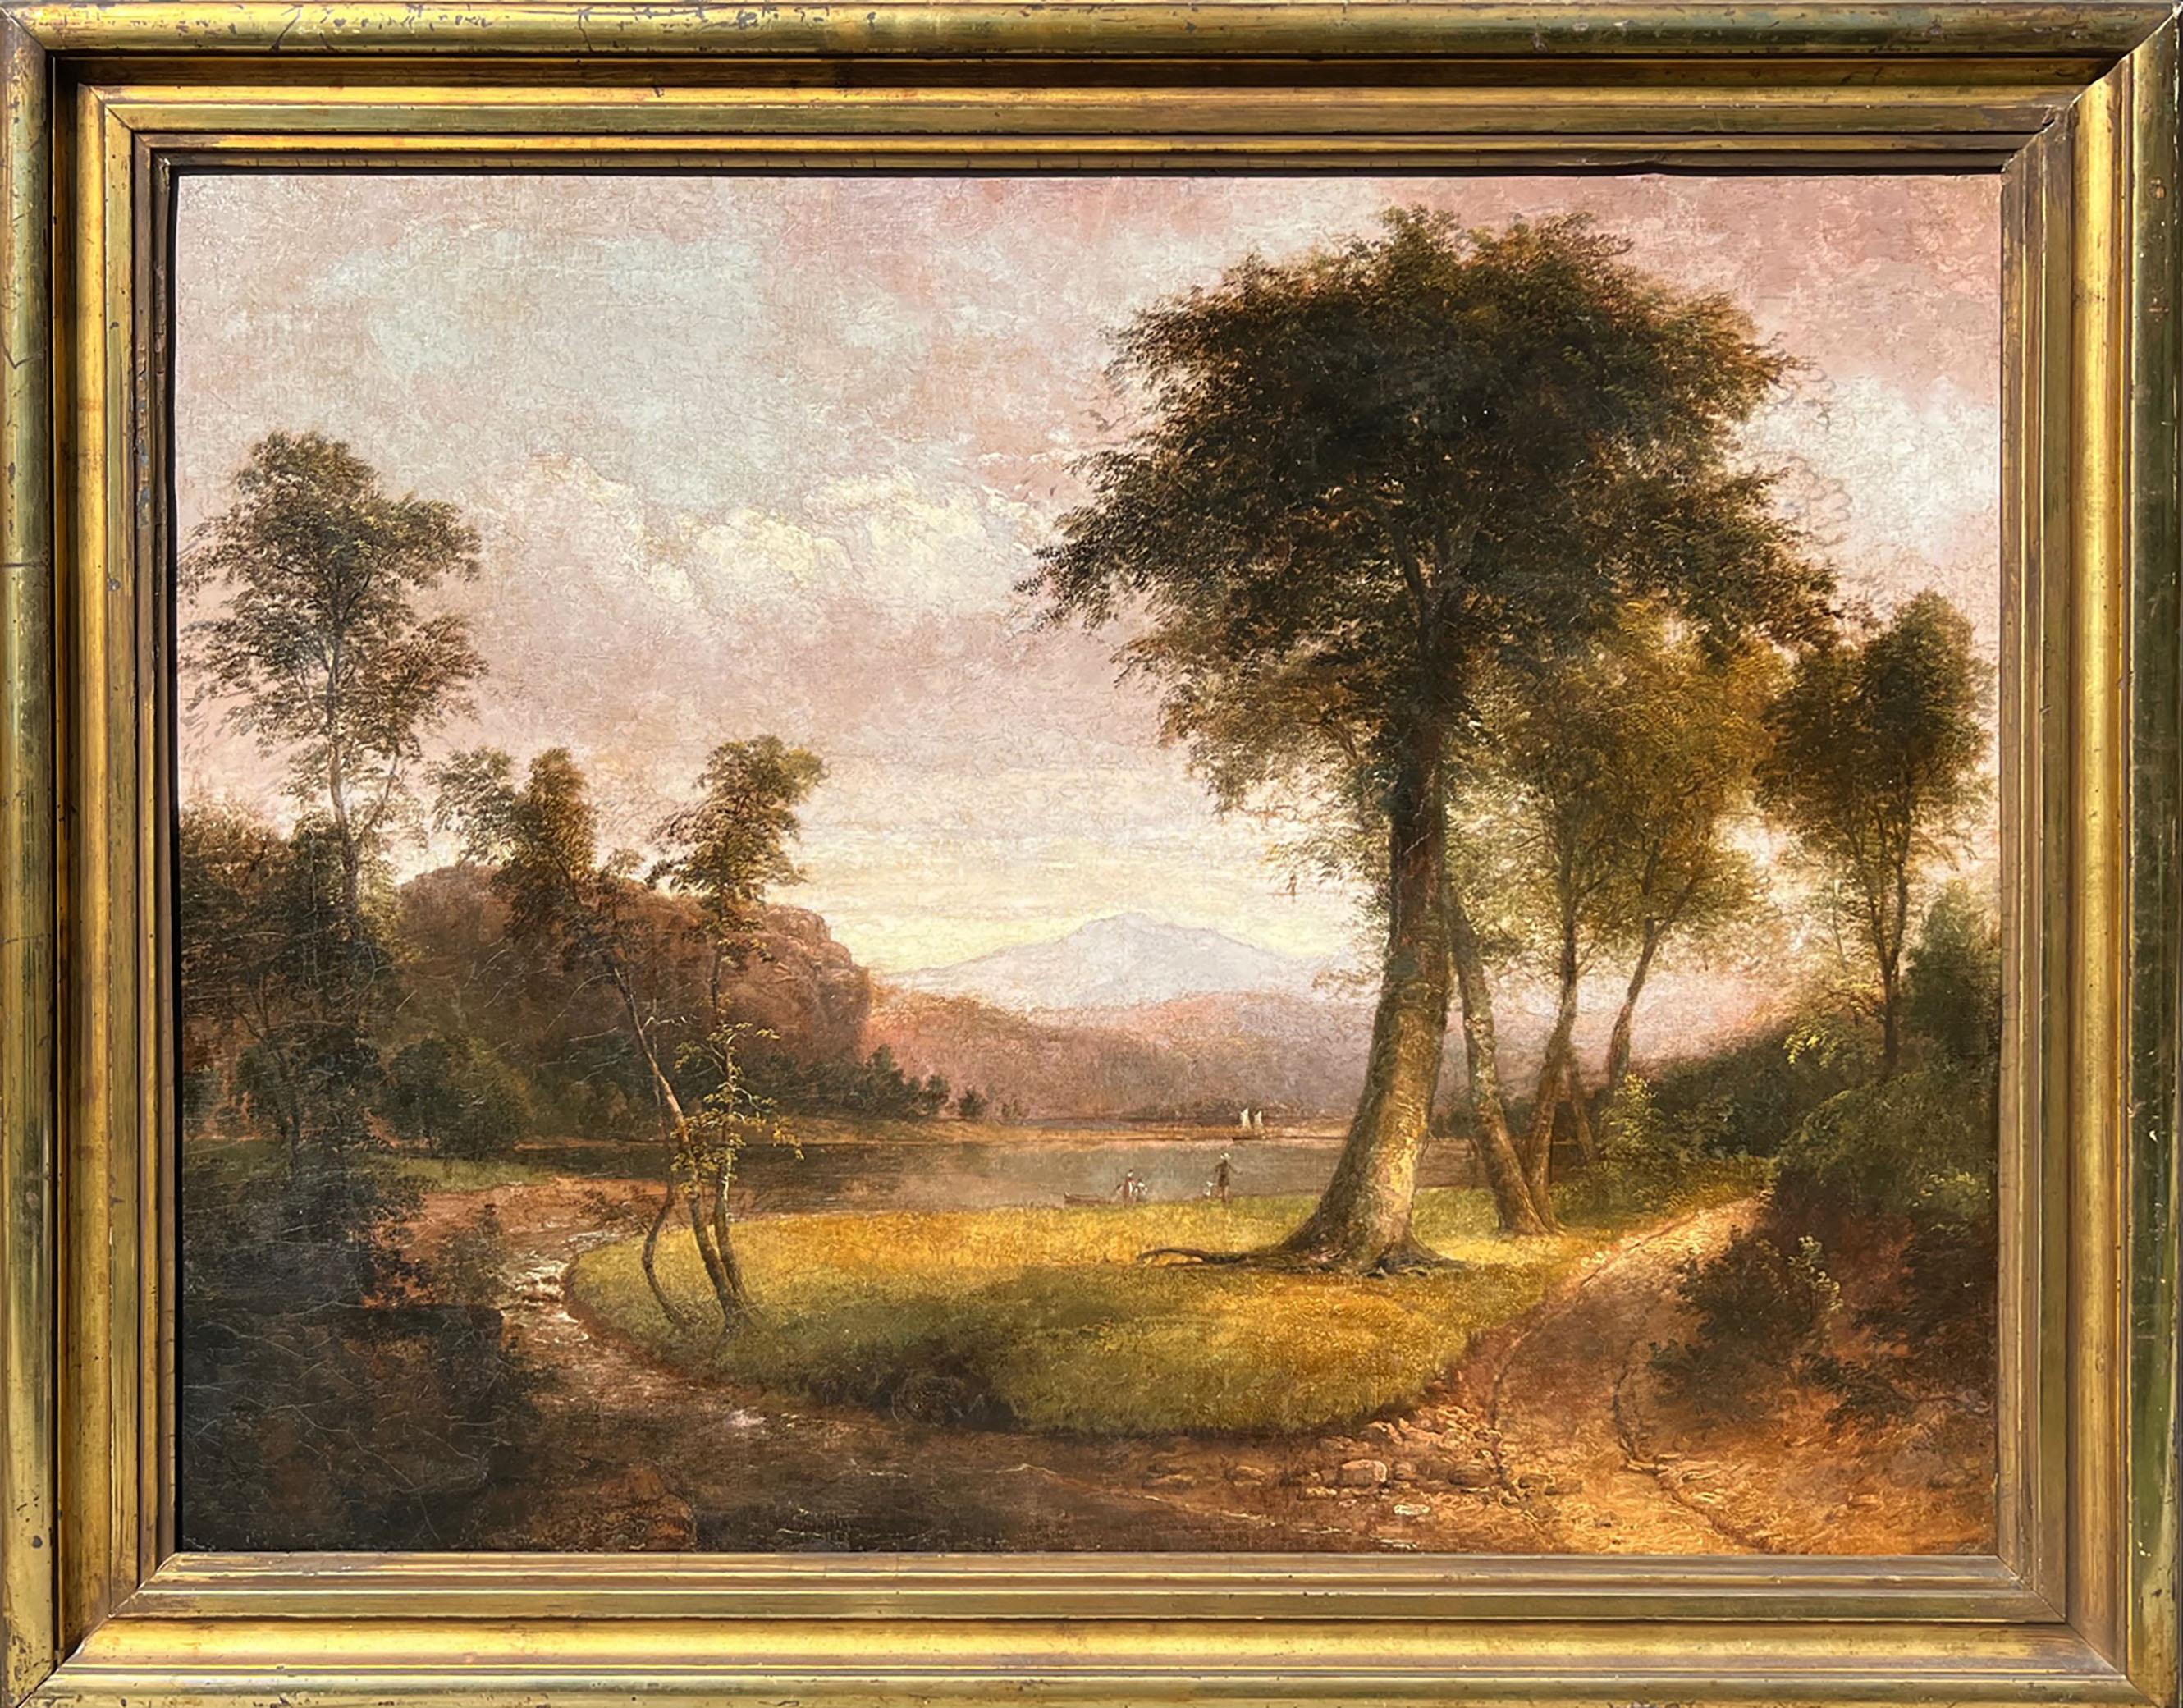 Hudson River School artist Thomas Doughty's (1793-1856) Catskill Landscape, 1836 is oil on canvas and measures 27.25 x 34.25 inches. The work is signed and dated by the artist at the lower right. Doughty's Catskill Landscape, 1836 is appropriately